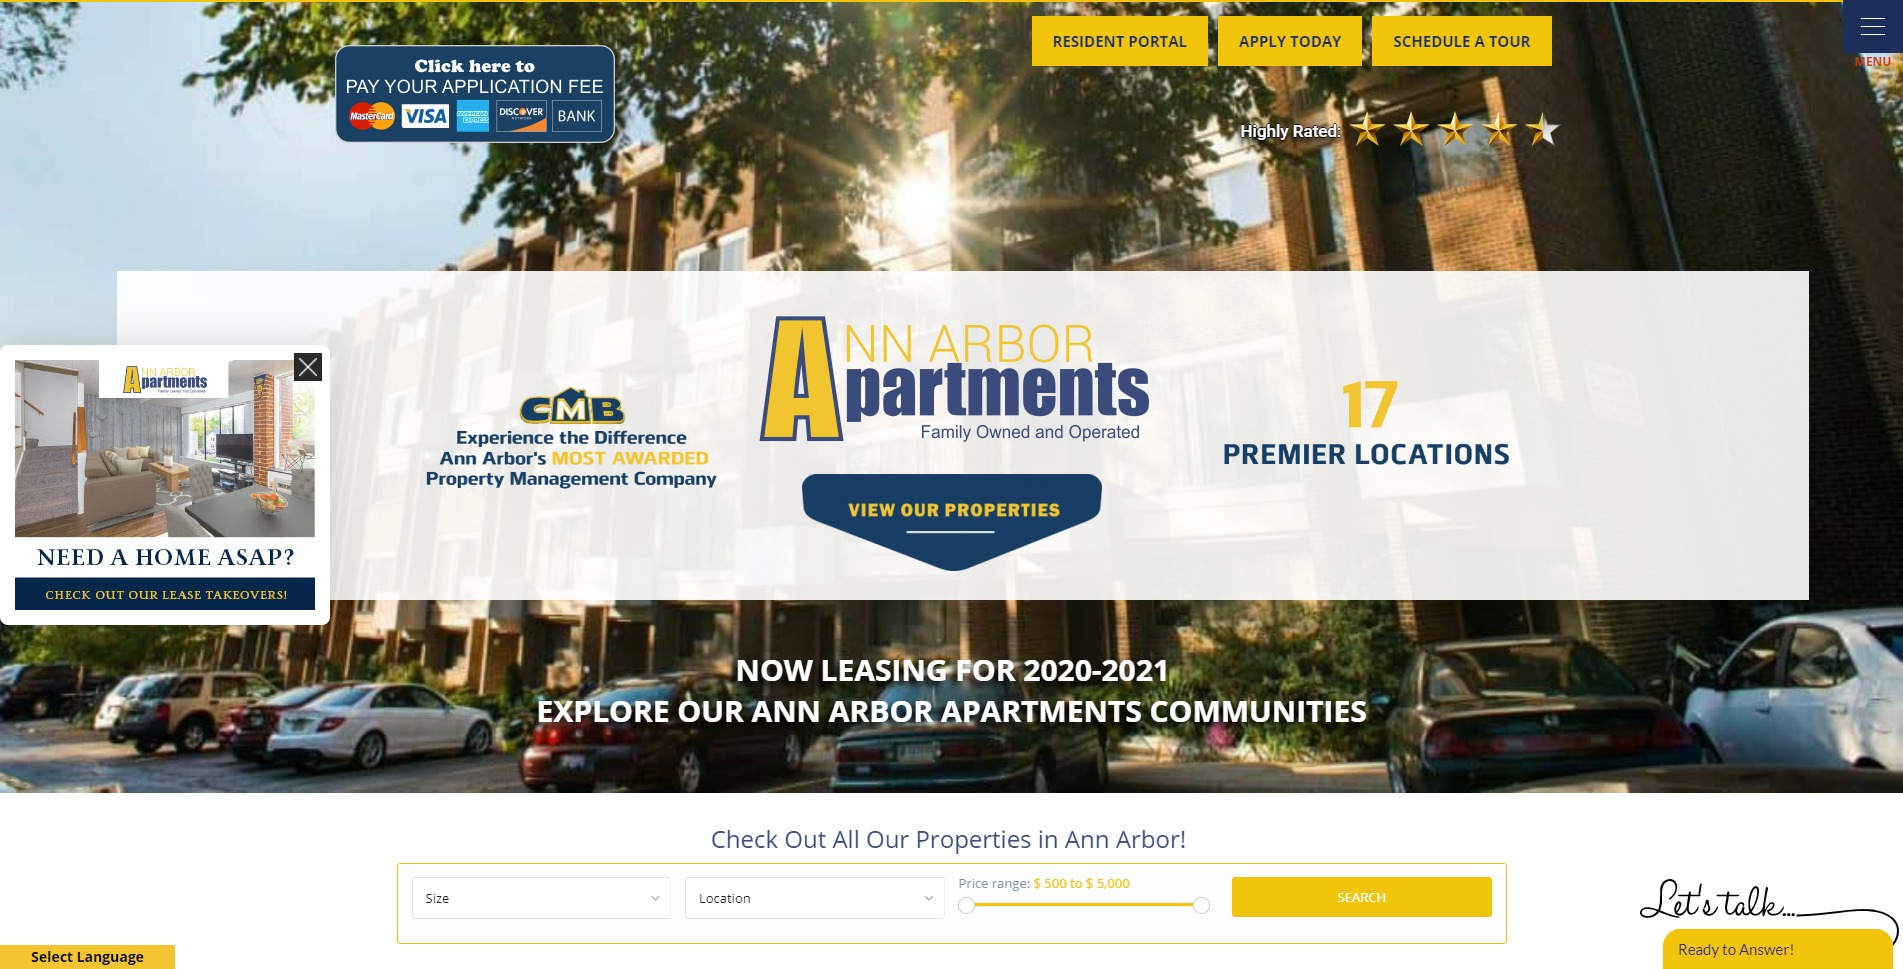 Ann-Arbor-Apartments-for-Rent-CMB-Management-in-Michigan.jpg'